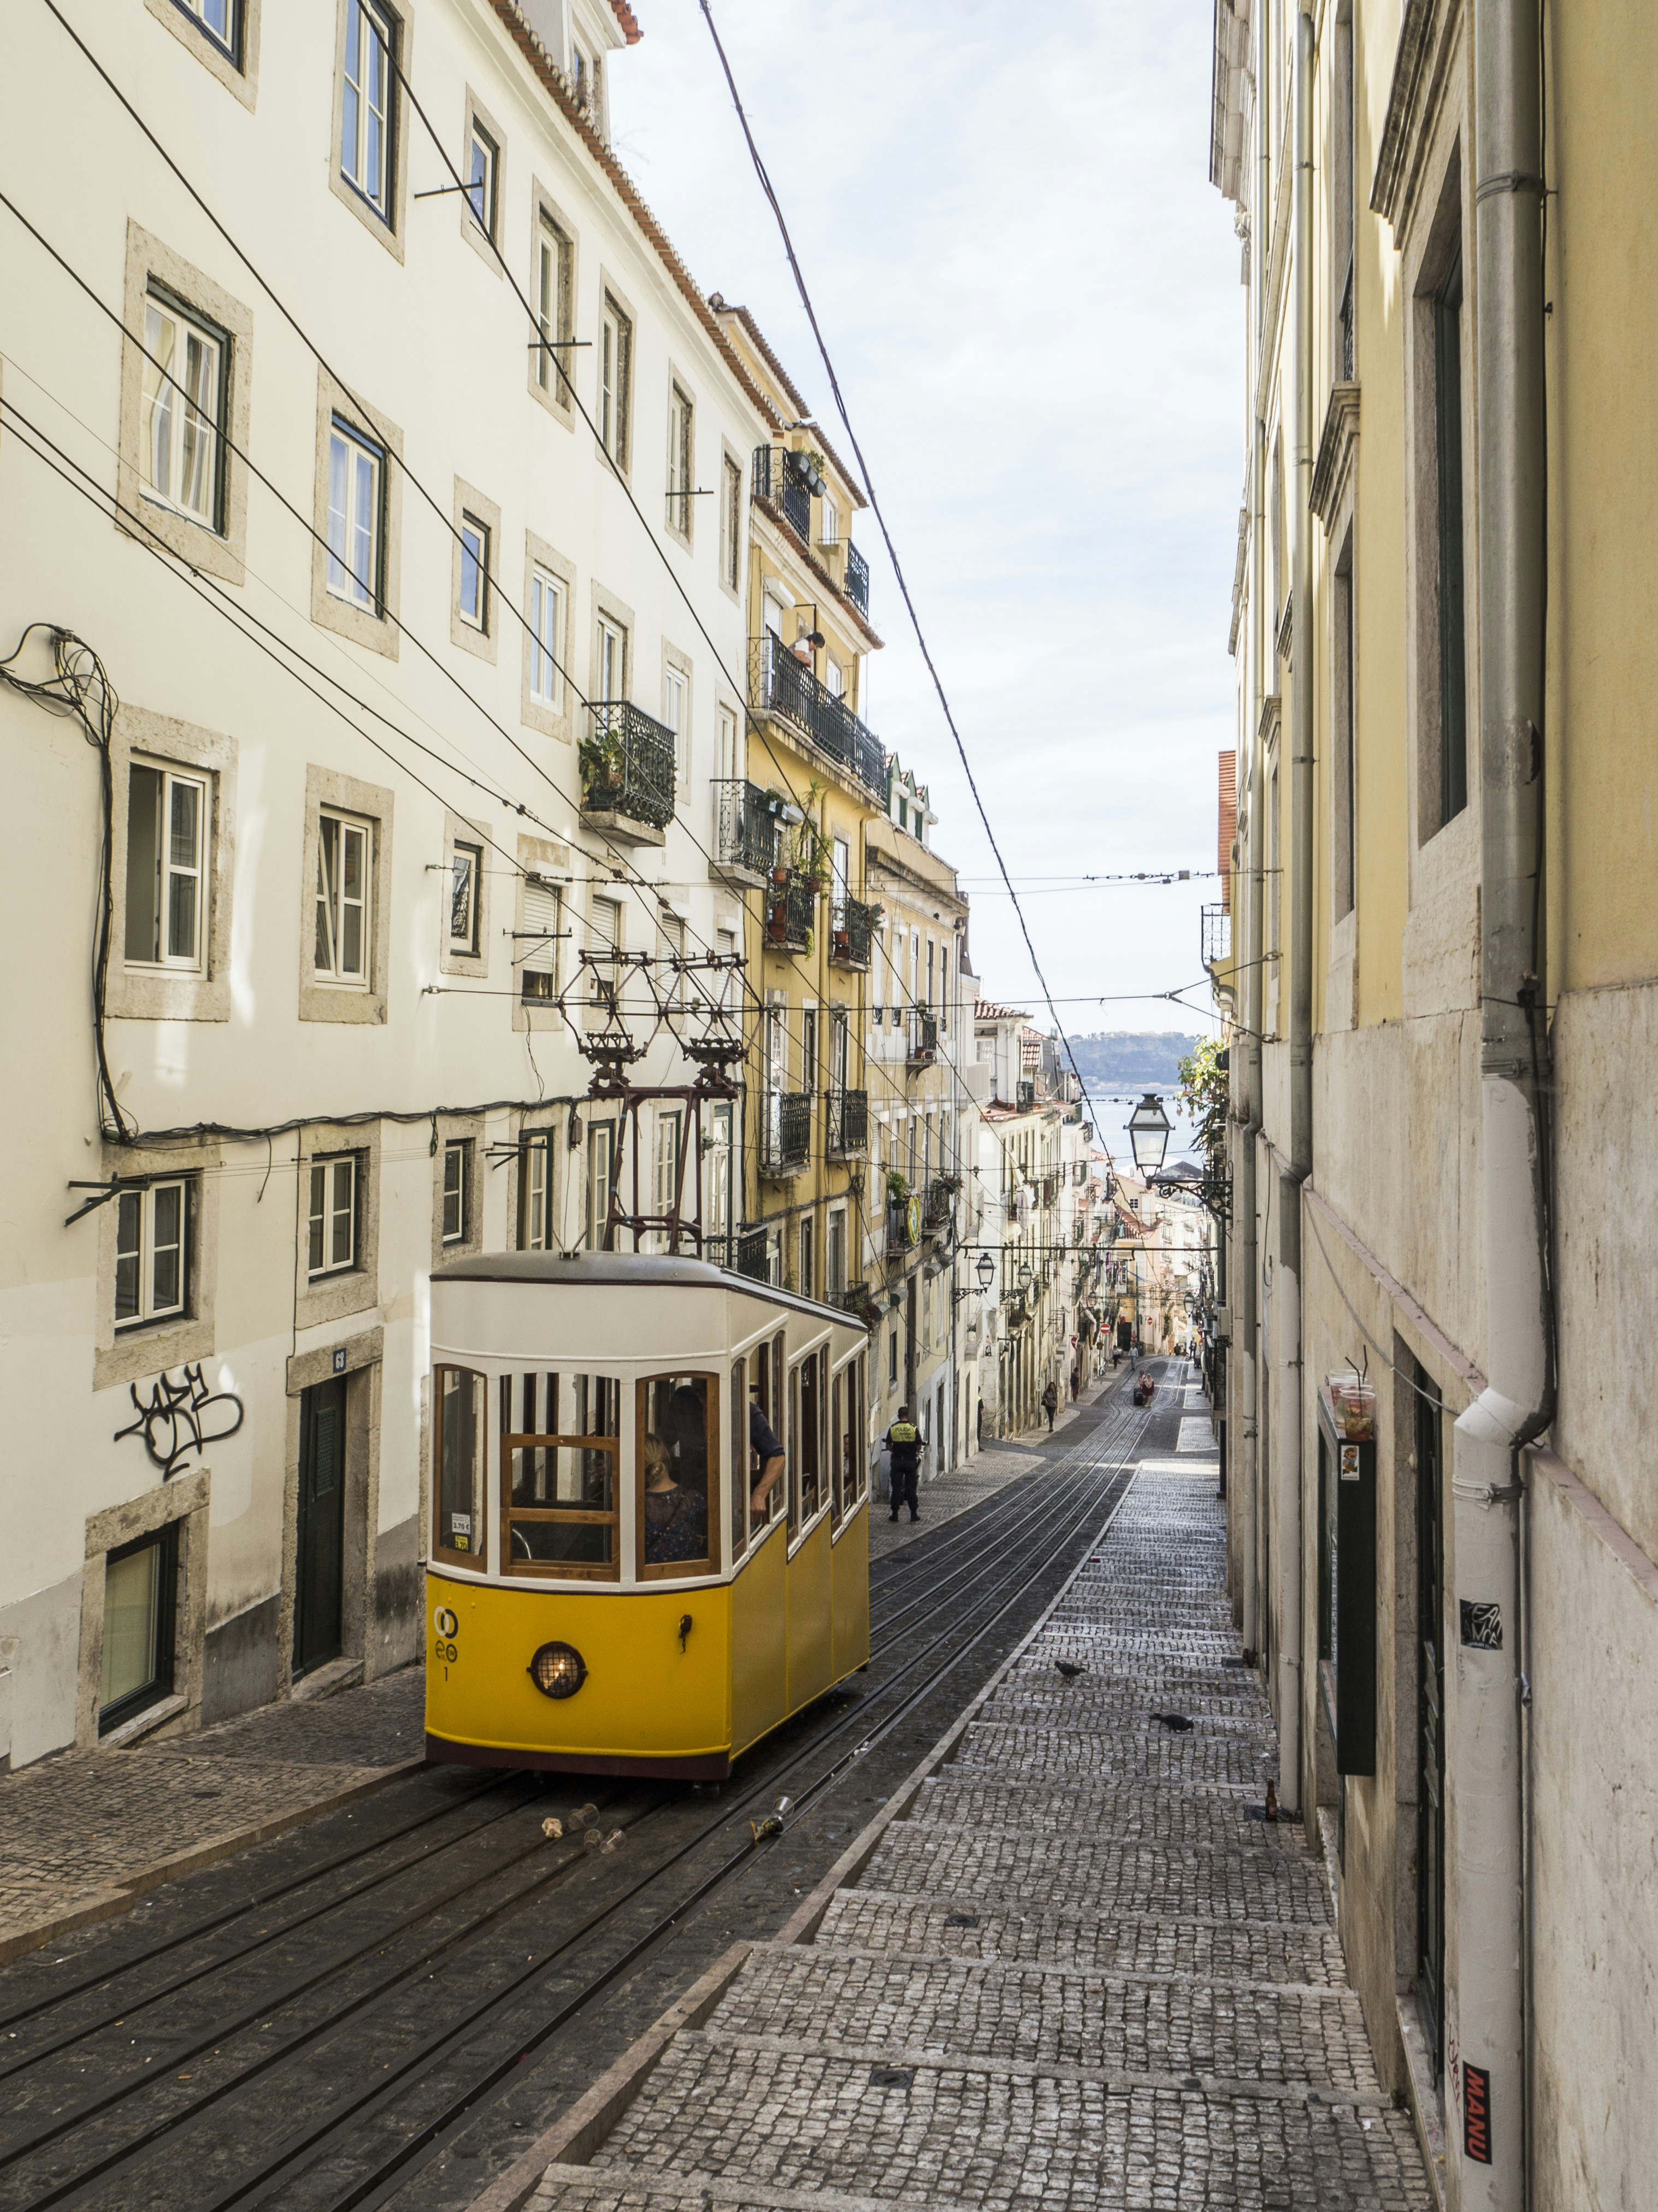 The hillsides that Lisbon is built upon offer an incredible view from various points of the narrow streets. No matter which corner you turn, you won’t be dissapointed. This is the view from the tracks of the Elevador da Bica, a cable car that was established in 1892.